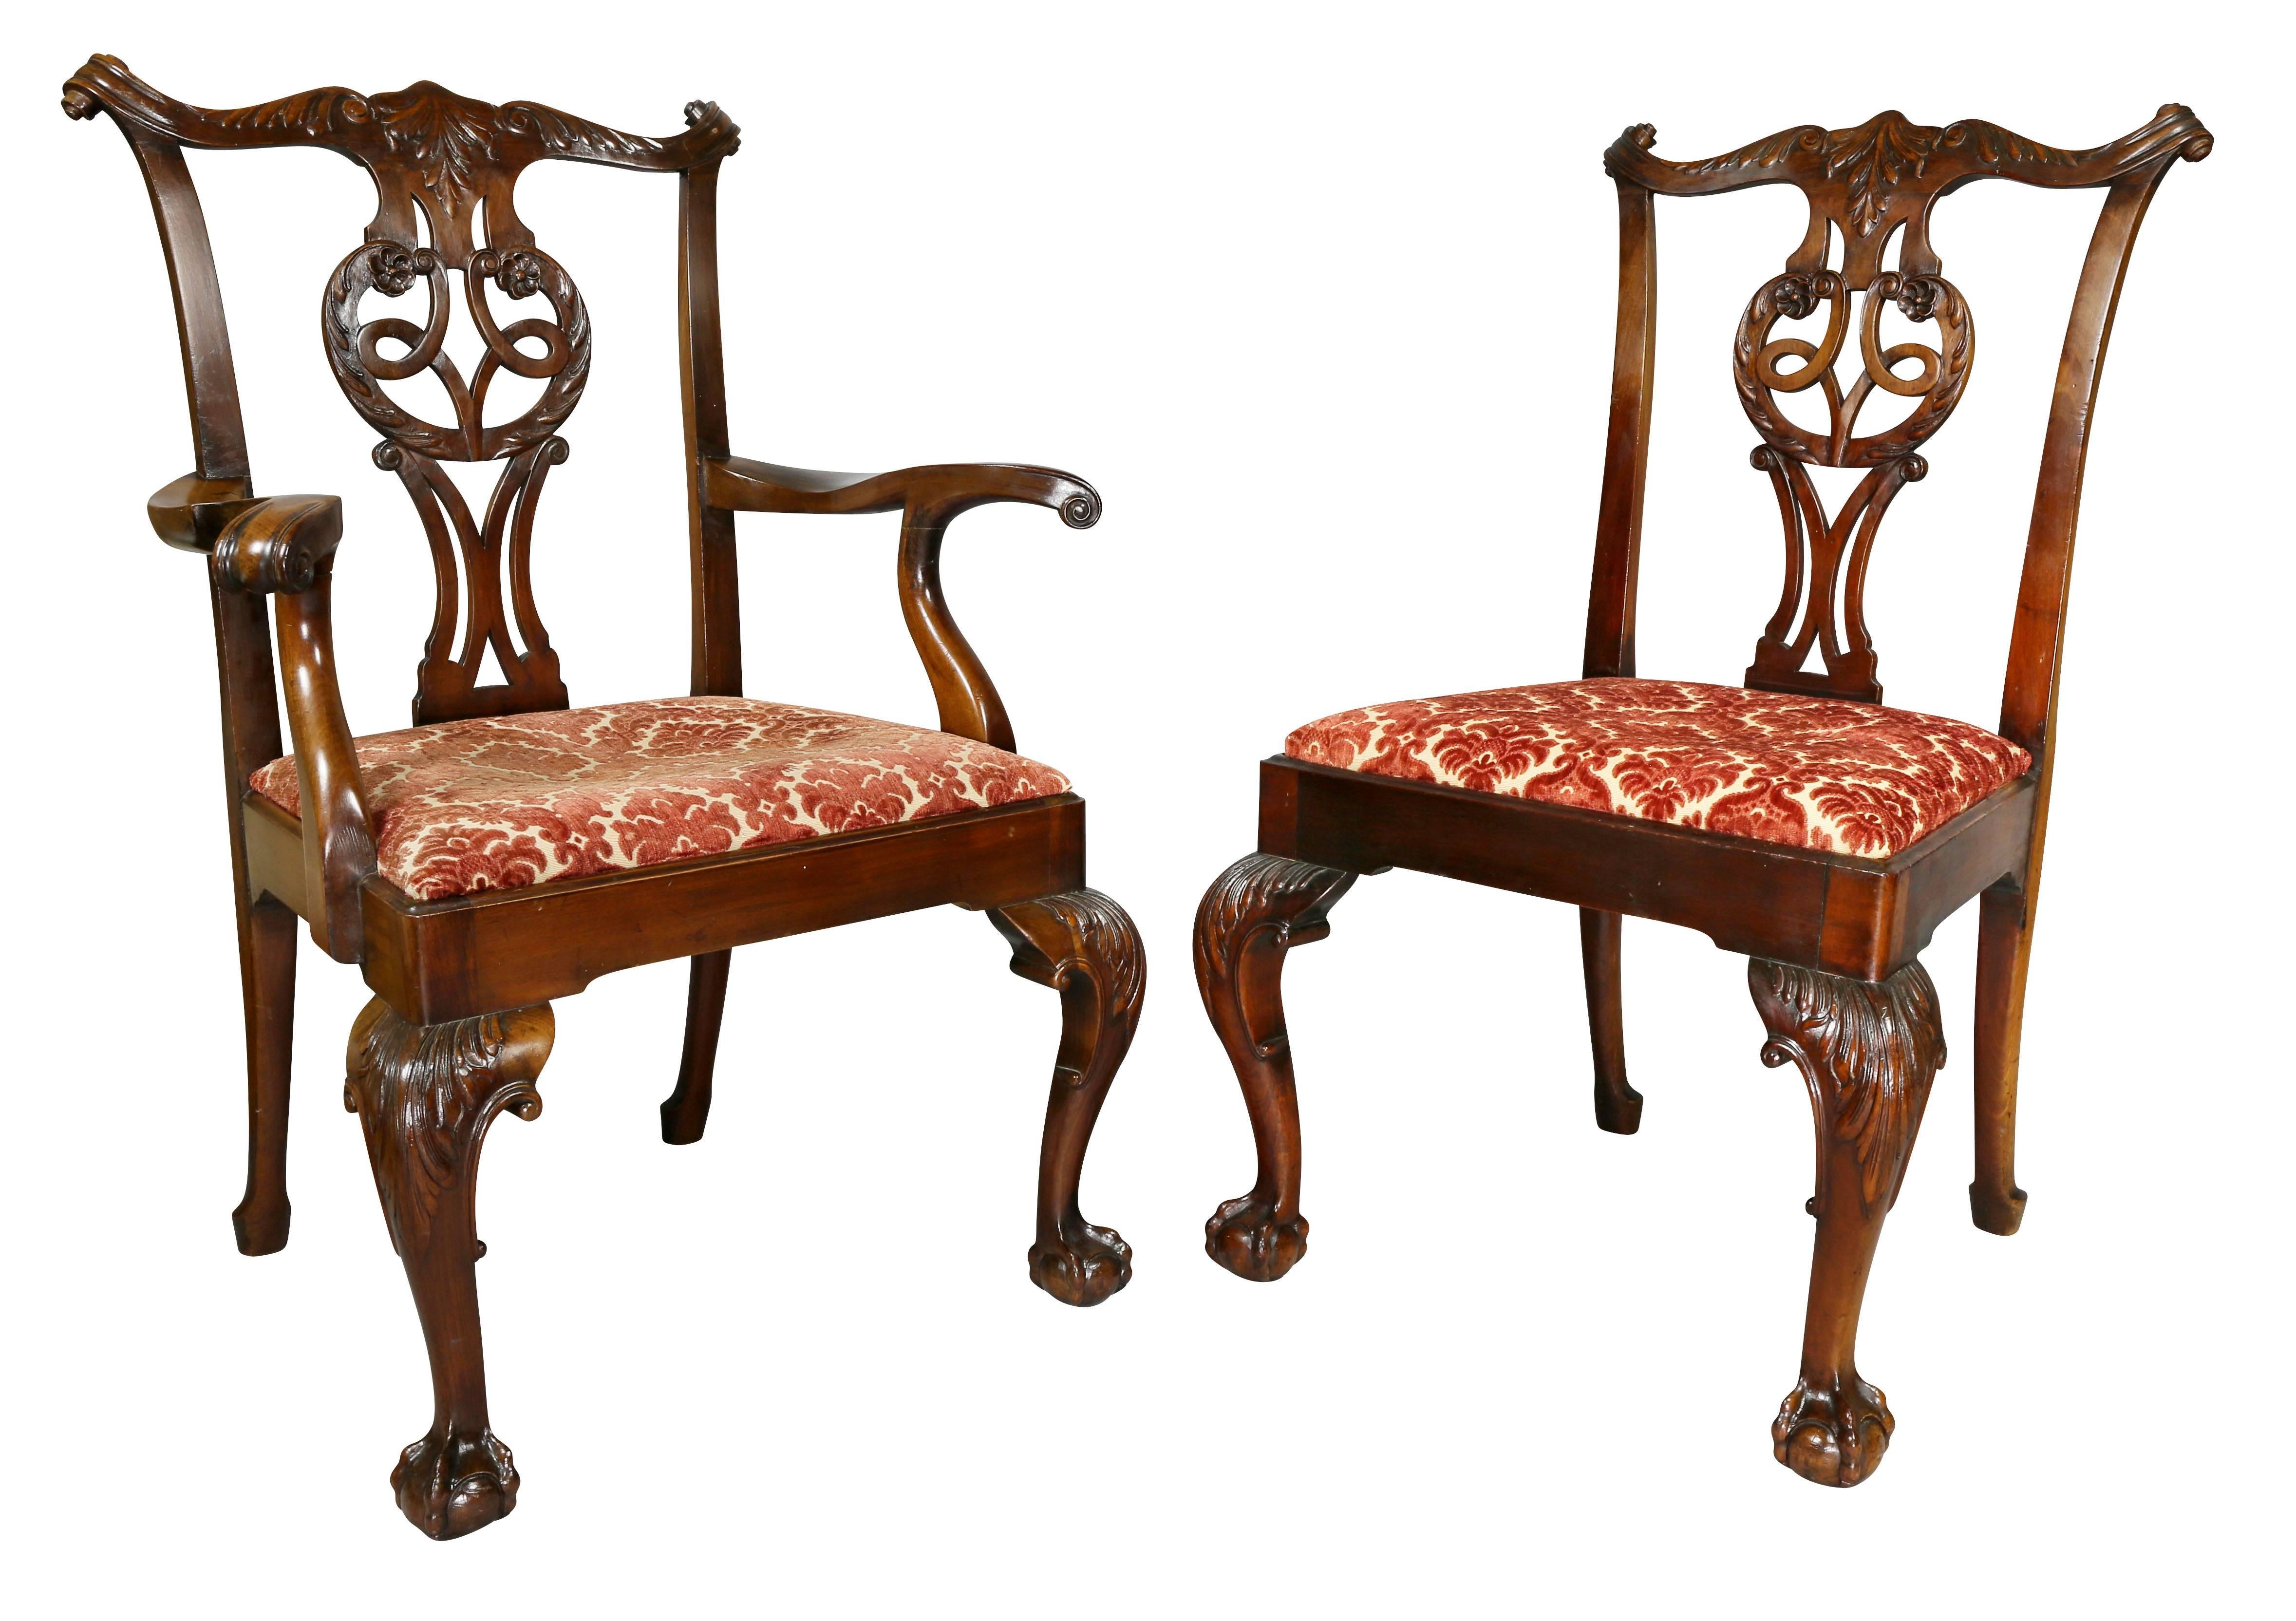 Each very sturdy and wonderful generous scale with serpentine carved crestrail over a pierced splat with carving and drop in upholstered seat raised on cabriole legs with ball and claw feet.